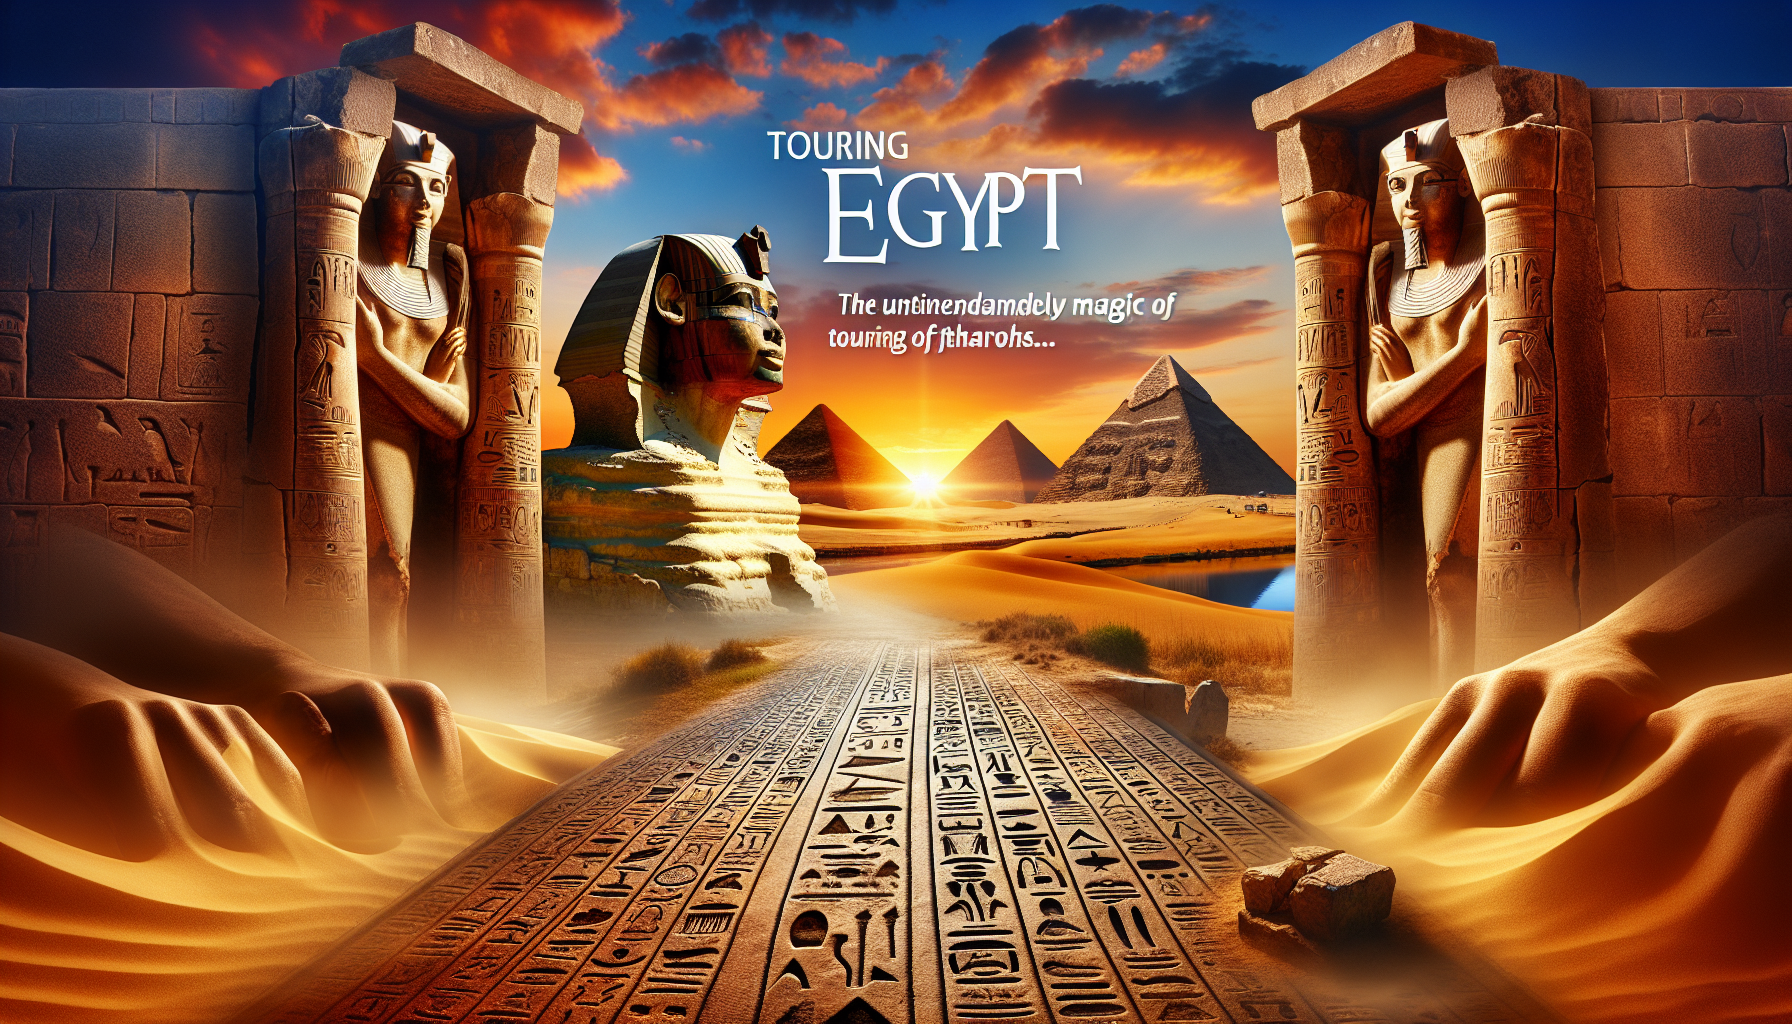 discover the wonders of egypt with its rich history, stunning architecture, and breathtaking landscapes. plan your dream vacation to egypt and immerse yourself in its vibrant culture and ancient treasures.